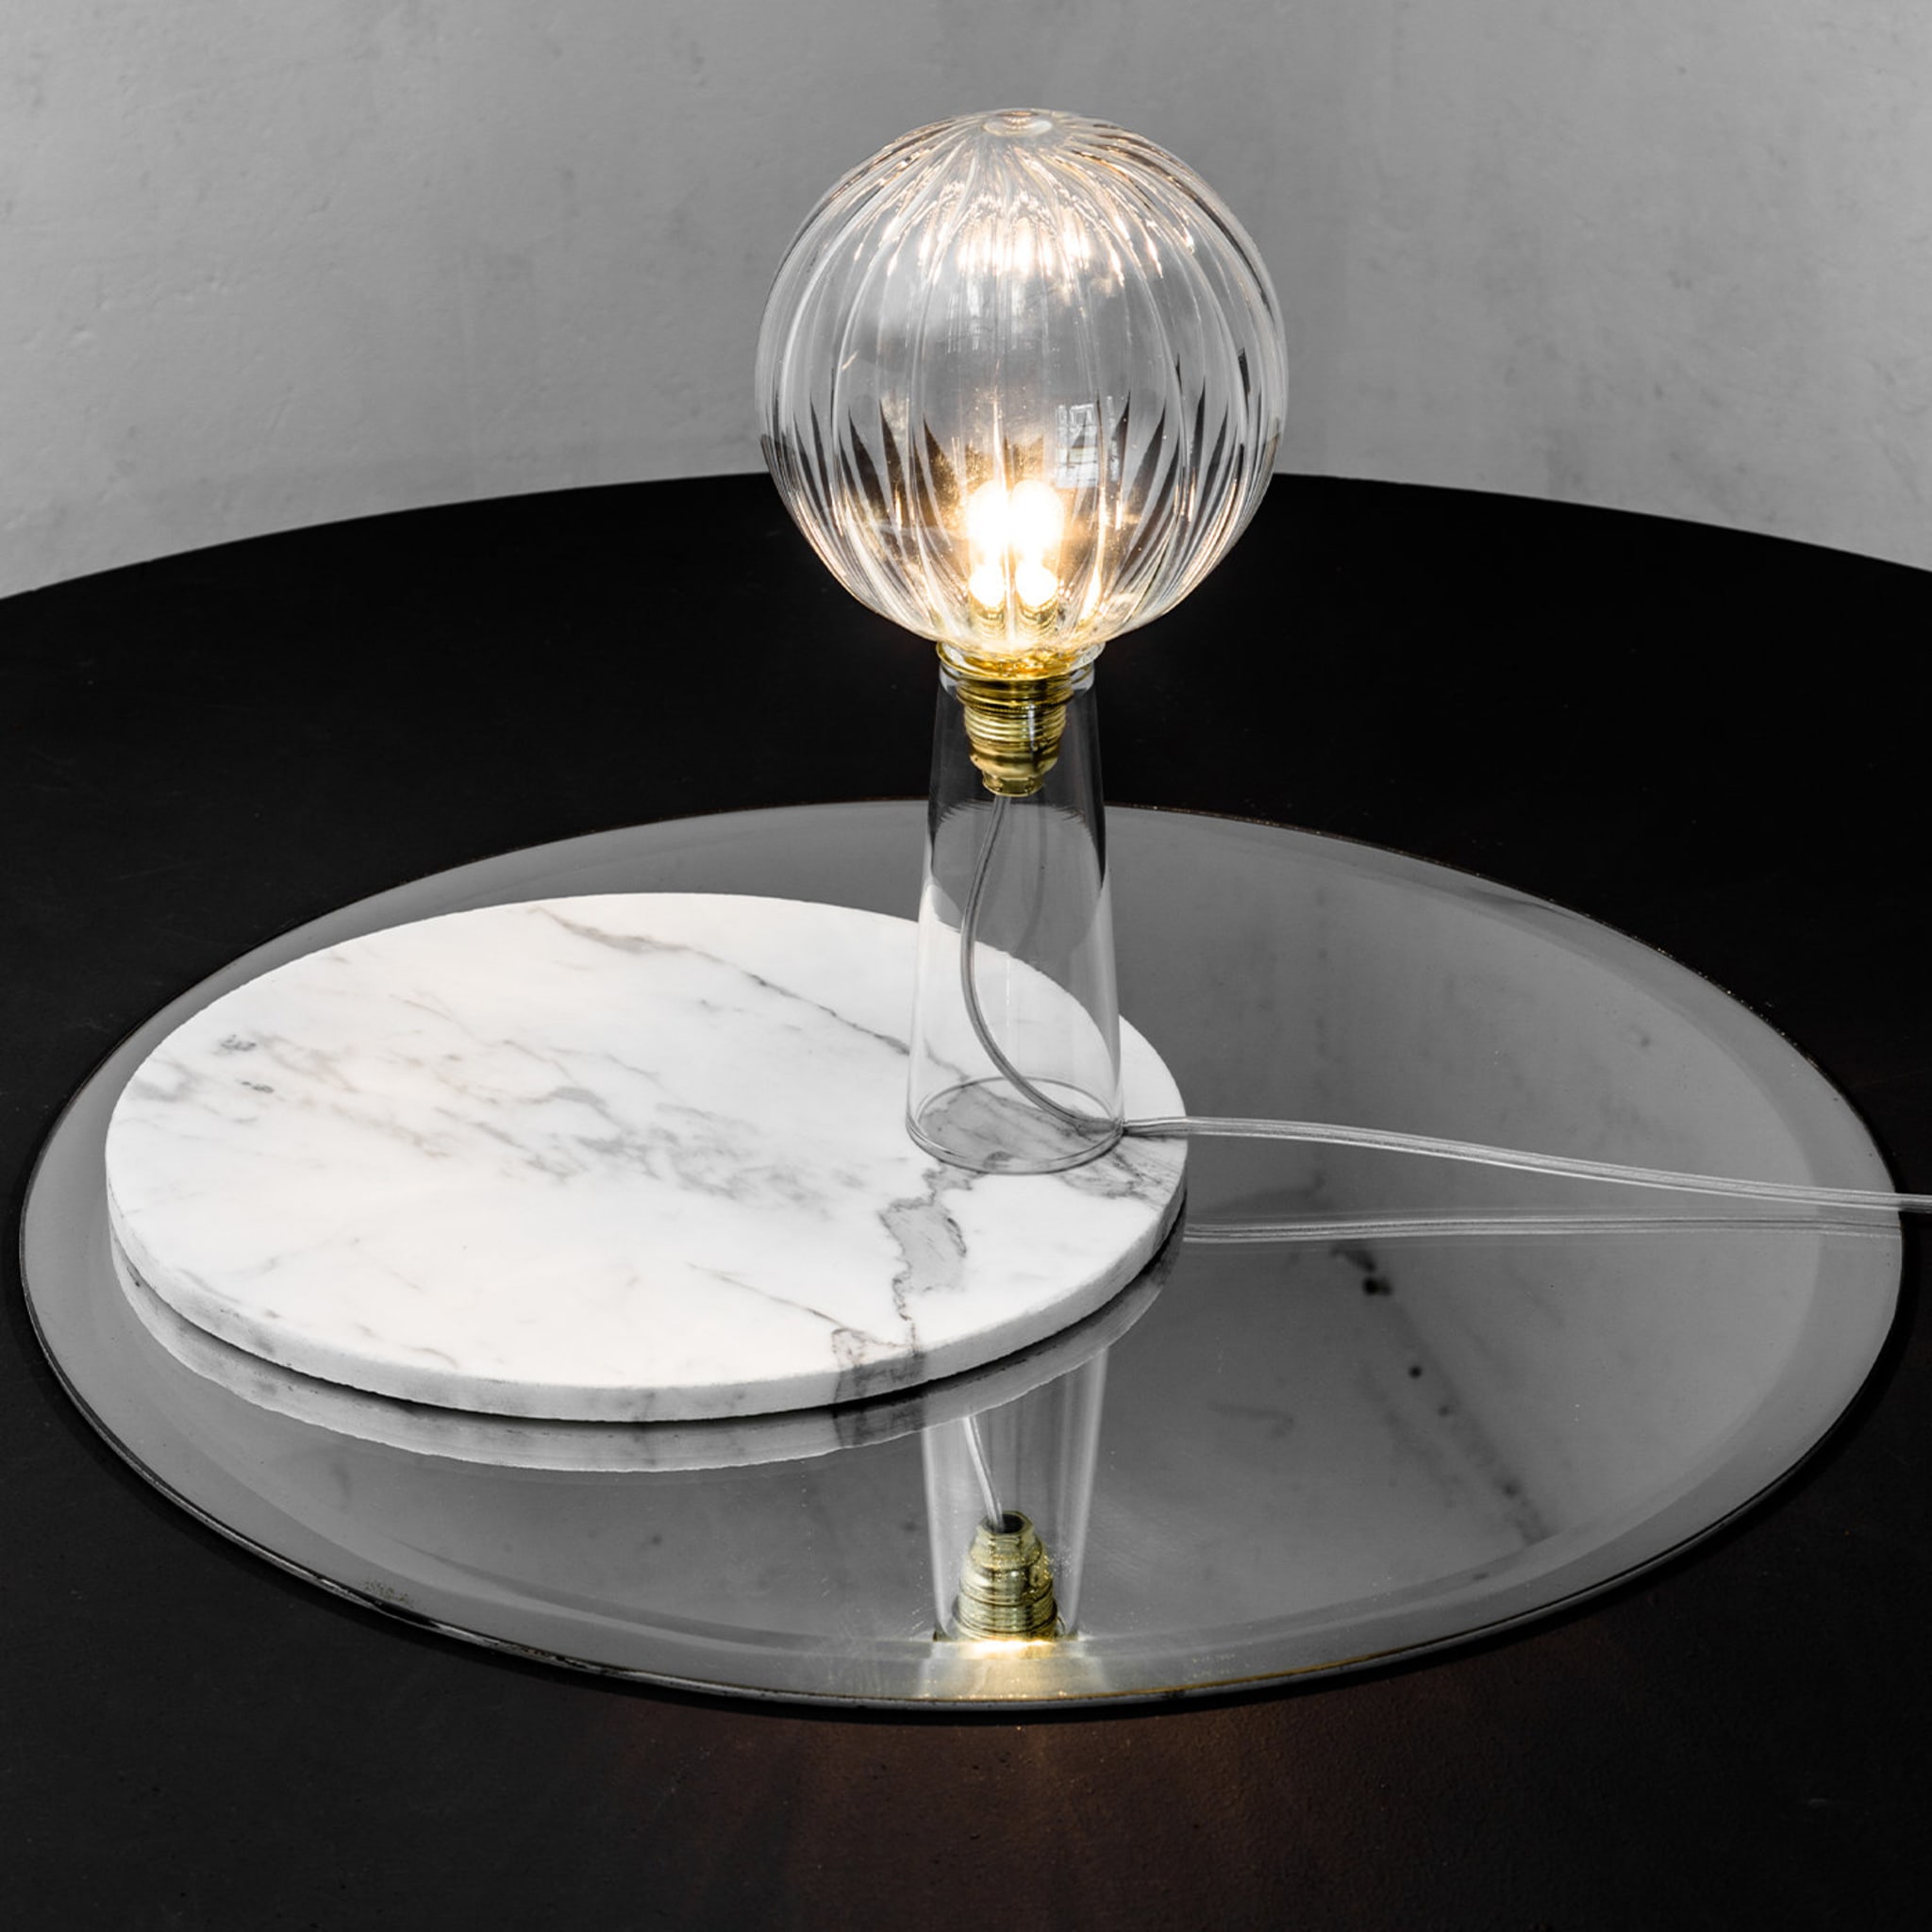 Ping Table Lamp  by Andrea Barra - Alternative view 3